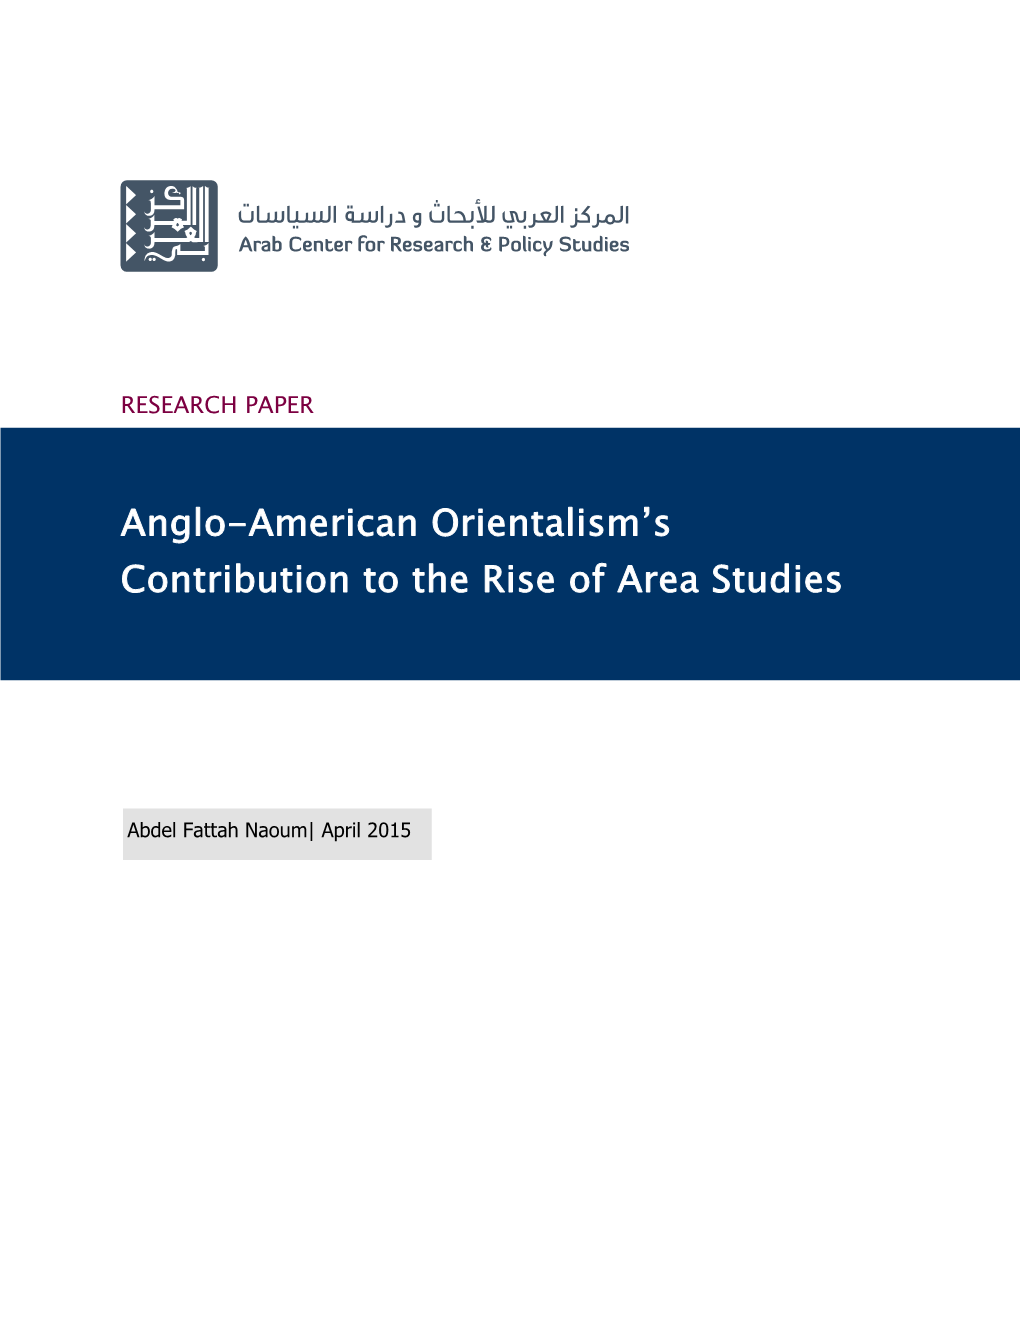 Anglo-American Orientalism's Contribution to the Rise of Area